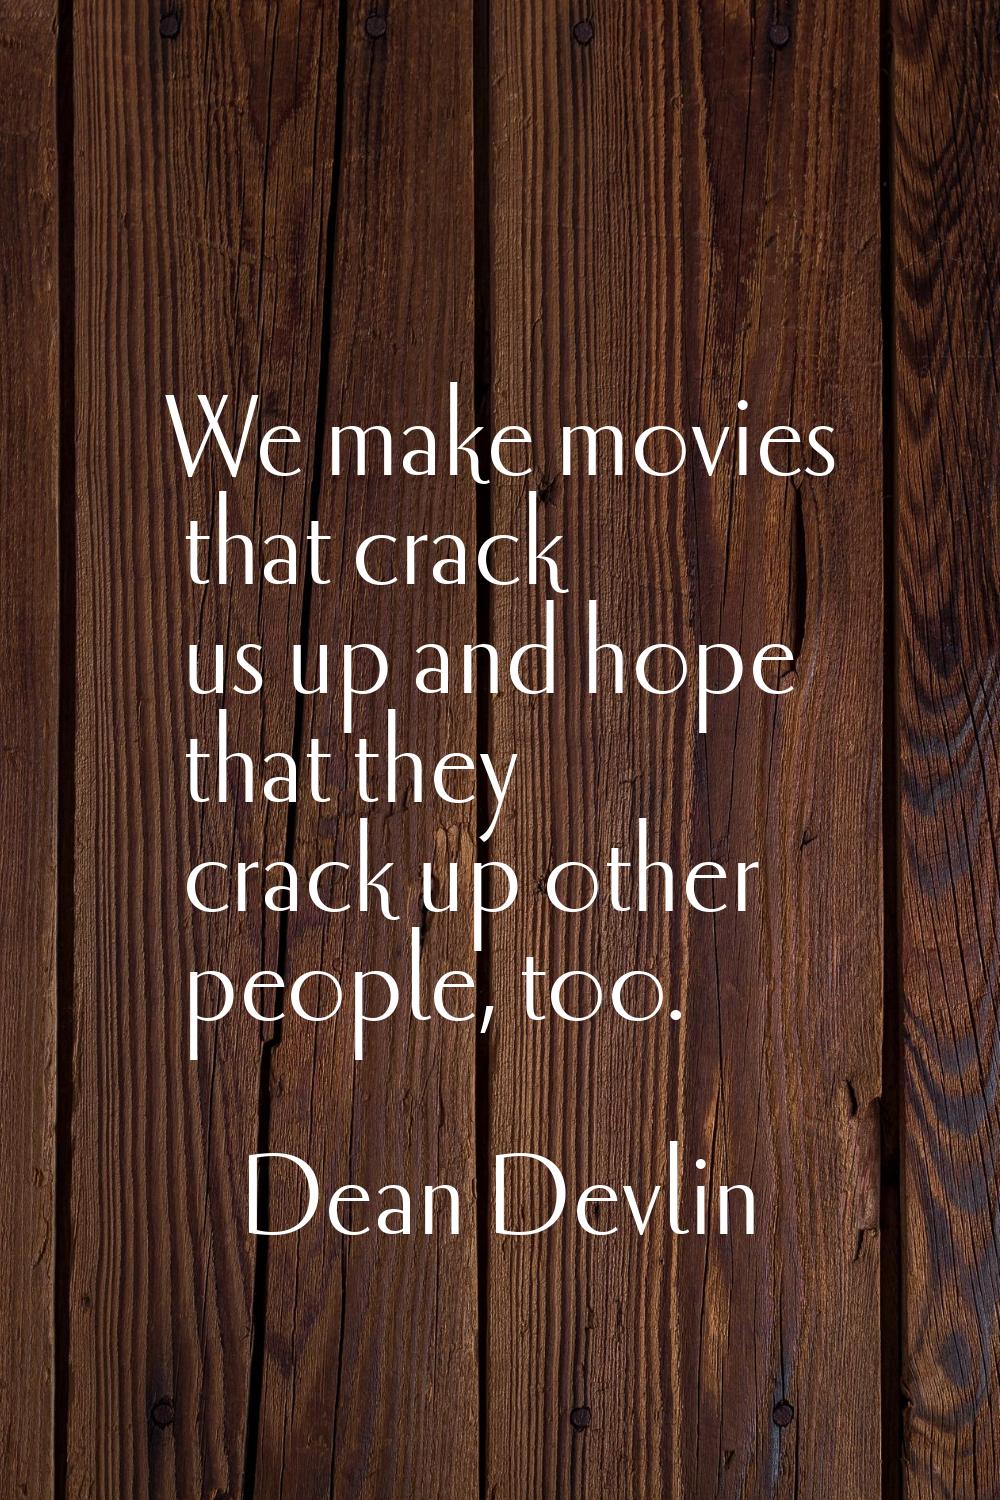 We make movies that crack us up and hope that they crack up other people, too.